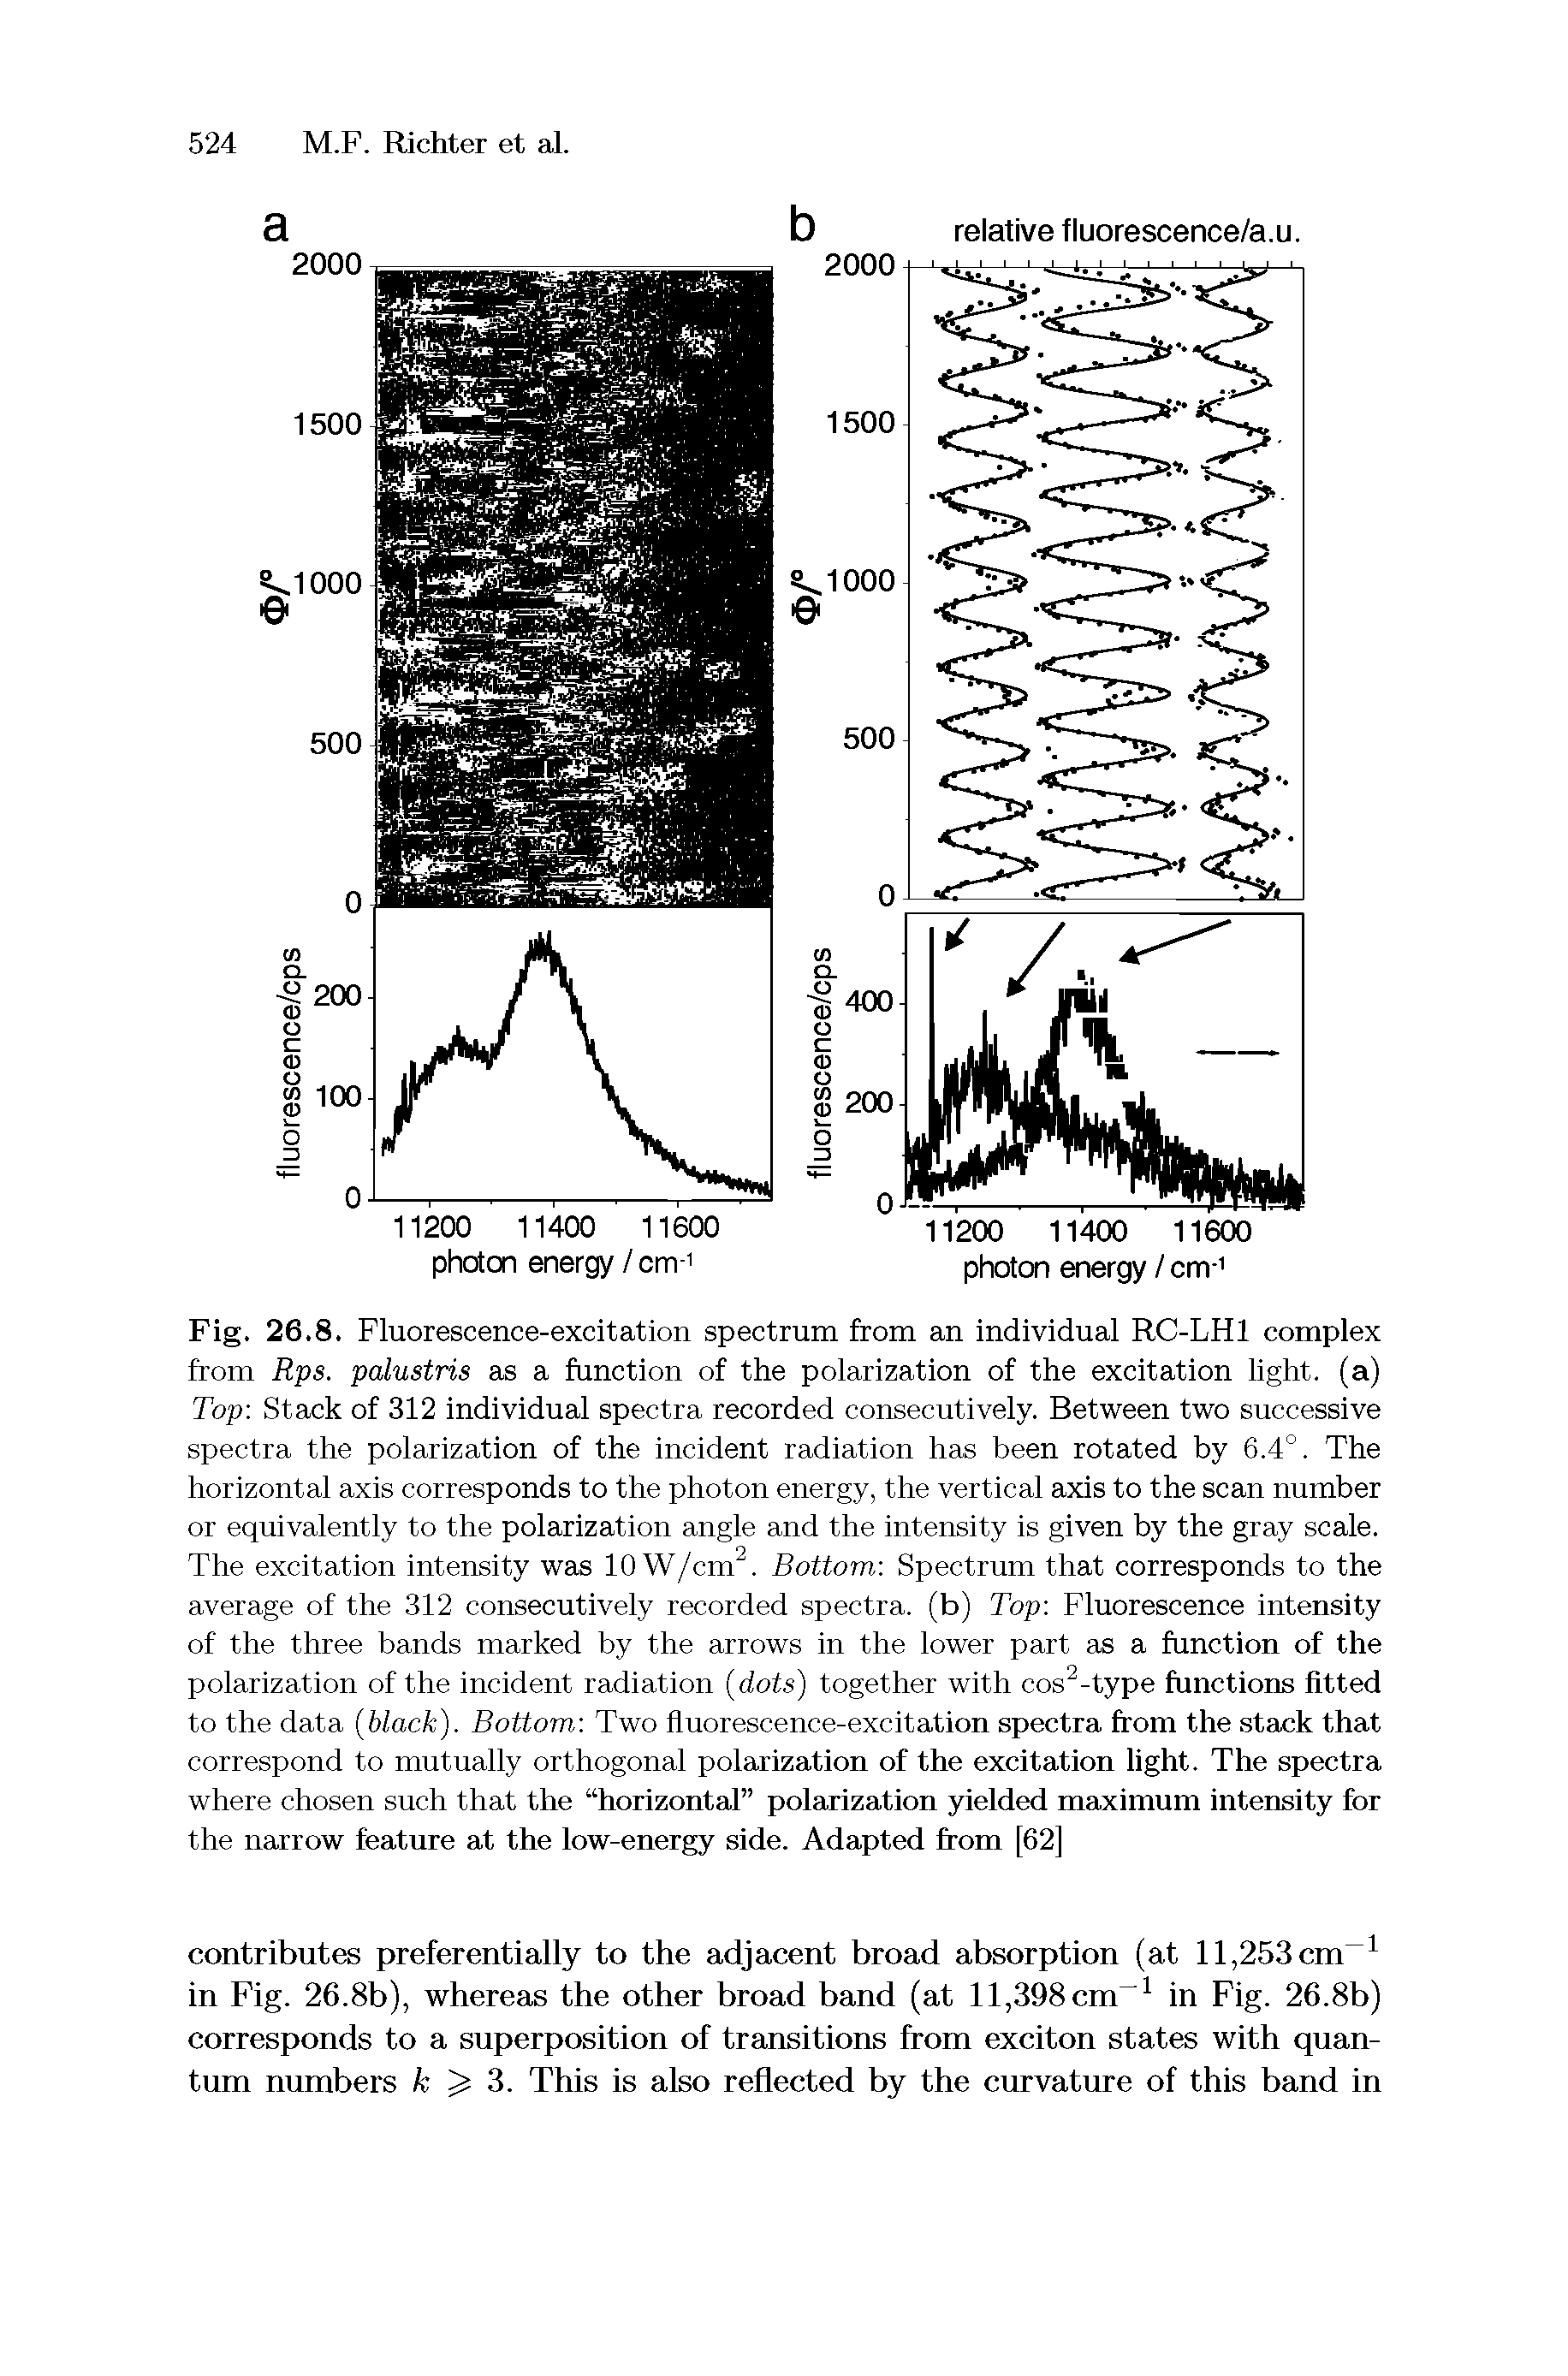 Fig. 26.8. Fluorescence-excitation spectrum from an individual RC-LHl complex from Rps. palustris as a function of the polarization of the excitation light, (a) Top Stack of 312 individual spectra recorded consecutively. Between two successive spectra the polarization of the incident radiation has been rotated by 6.4°. The horizontal axis corresponds to the photon energy, the vertical axis to the scan number or equivalently to the polarization angle and the intensity is given by the gray scale. The excitation intensity was 10 W/cm. Bottom Spectrum that corresponds to the average of the 312 consecutively recorded spectra, (b) Top Fluorescence intensity of the three bands marked by the arrows in the lower part as a function of the polarization of the incident radiation (dots) together with cos -type functions fitted to the data black). Bottom Two fluorescence-excitation spectra from the stack that correspond to mutually orthogonal polarization of the excitation light. The spectra where chosen such that the horizontal polarization yielded maximnm intensity for the narrow feature at the low-energy side. Adapted from [62]...